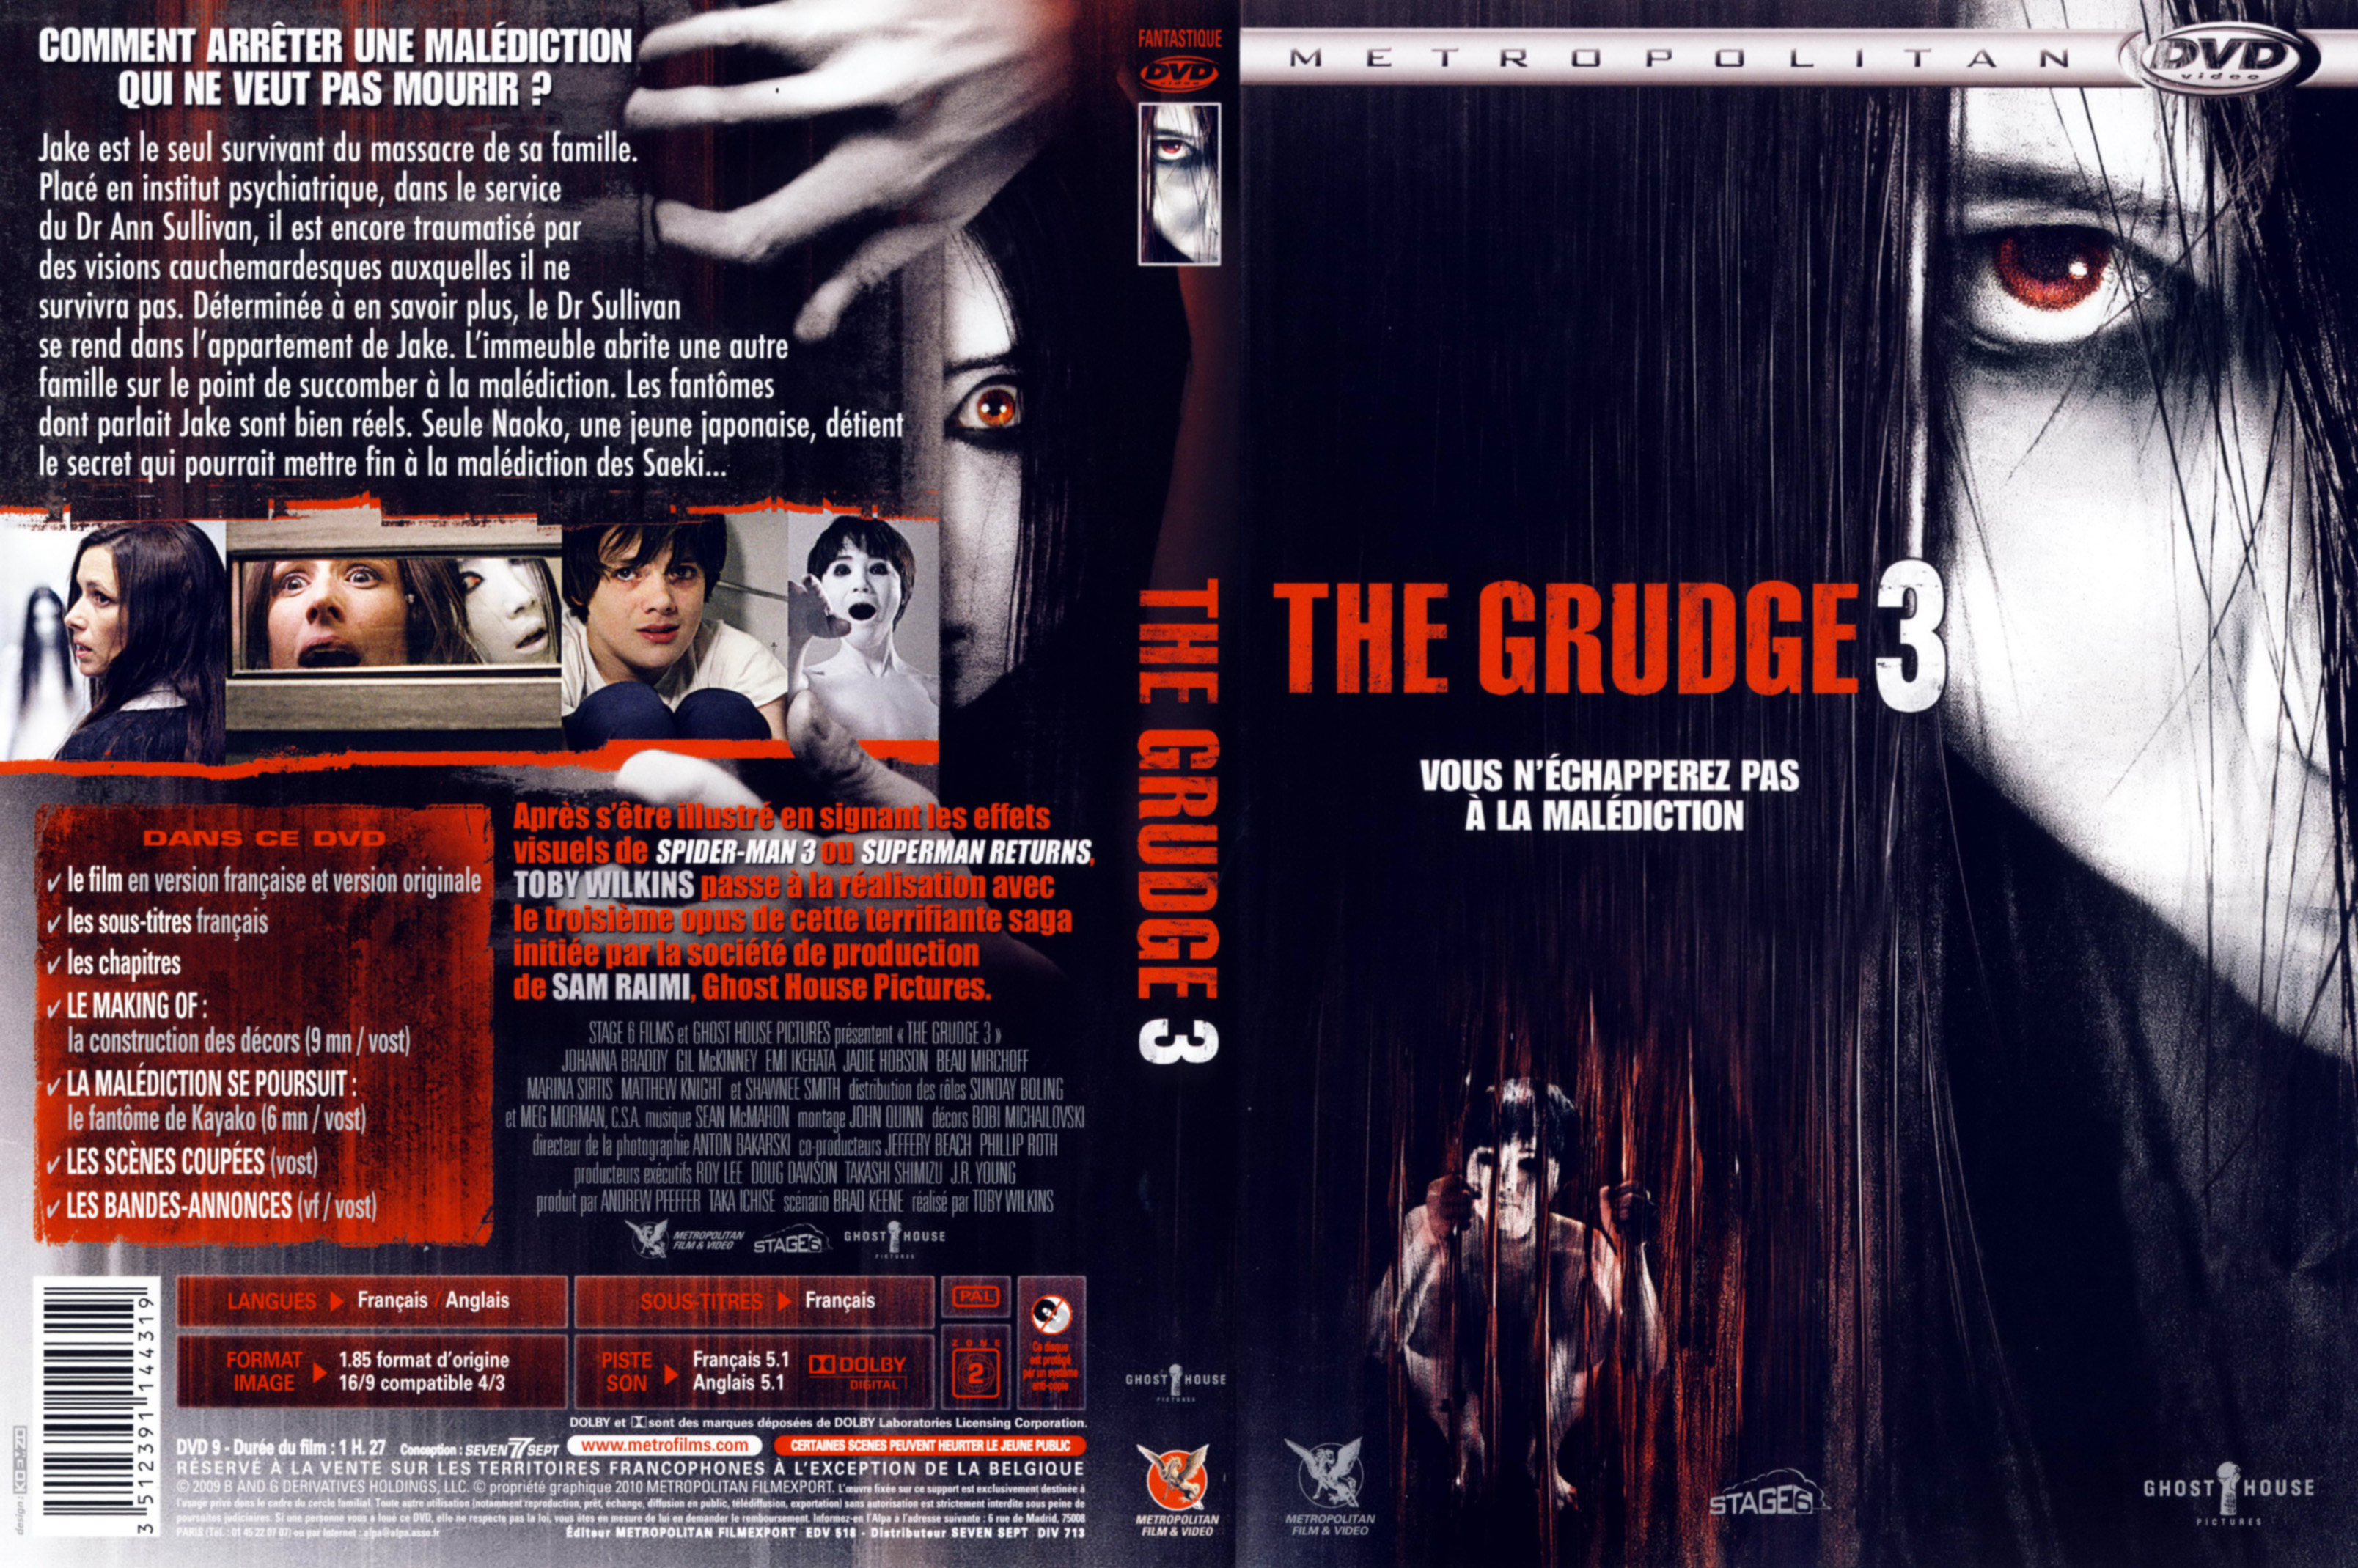 Jaquette DVD The grudge 3